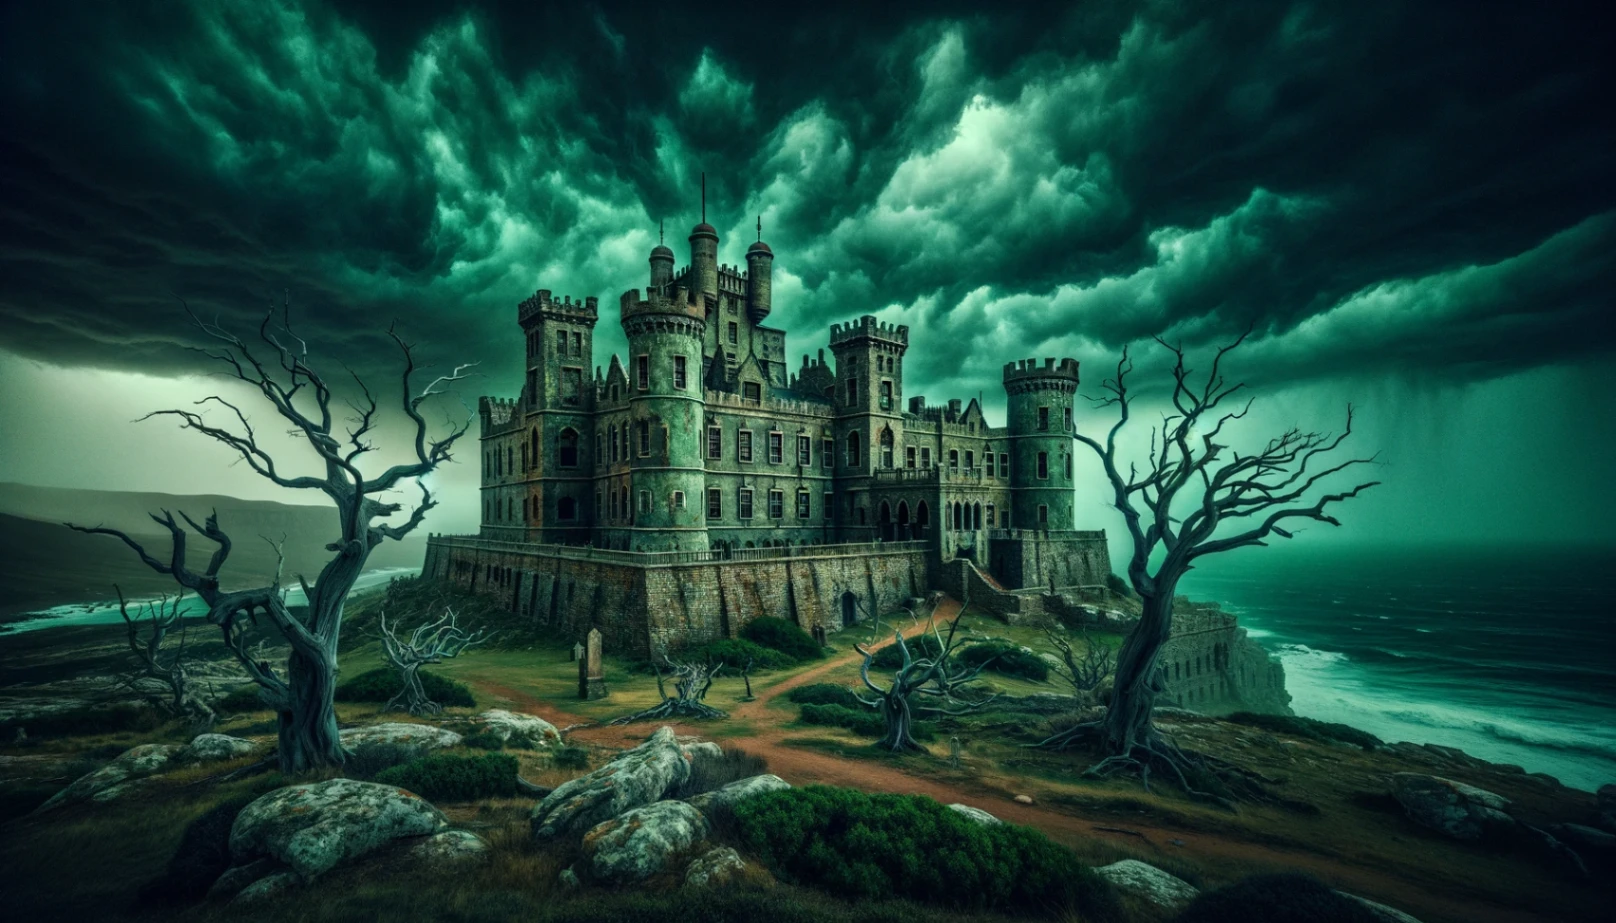 Top 10 Haunted Places Around the World to Explore